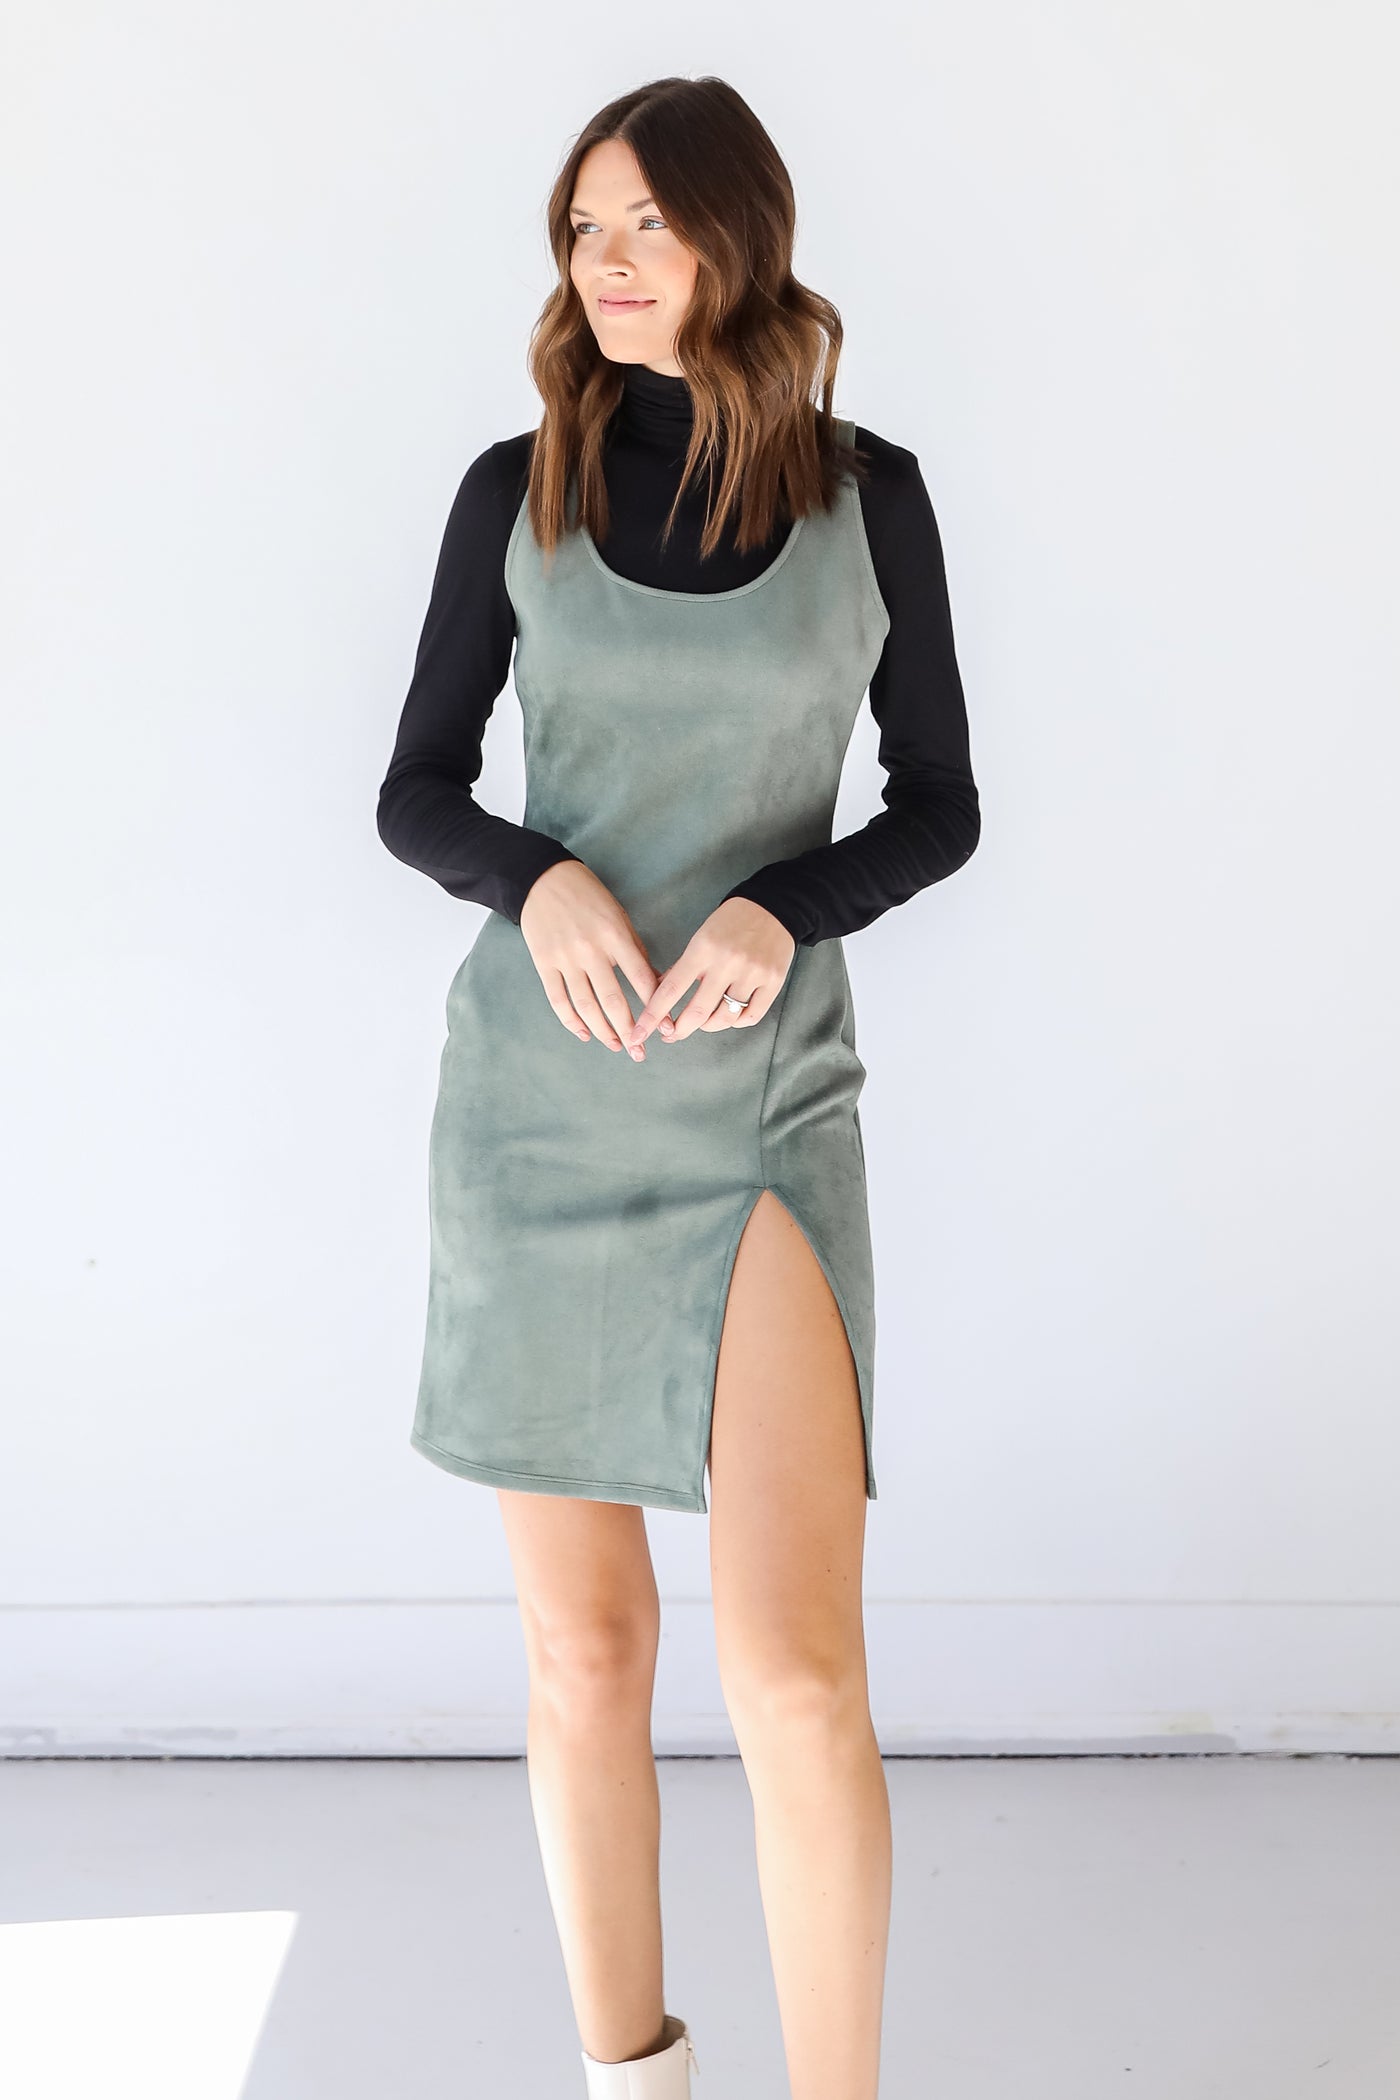 Suede Bodycon Dress in teal front view